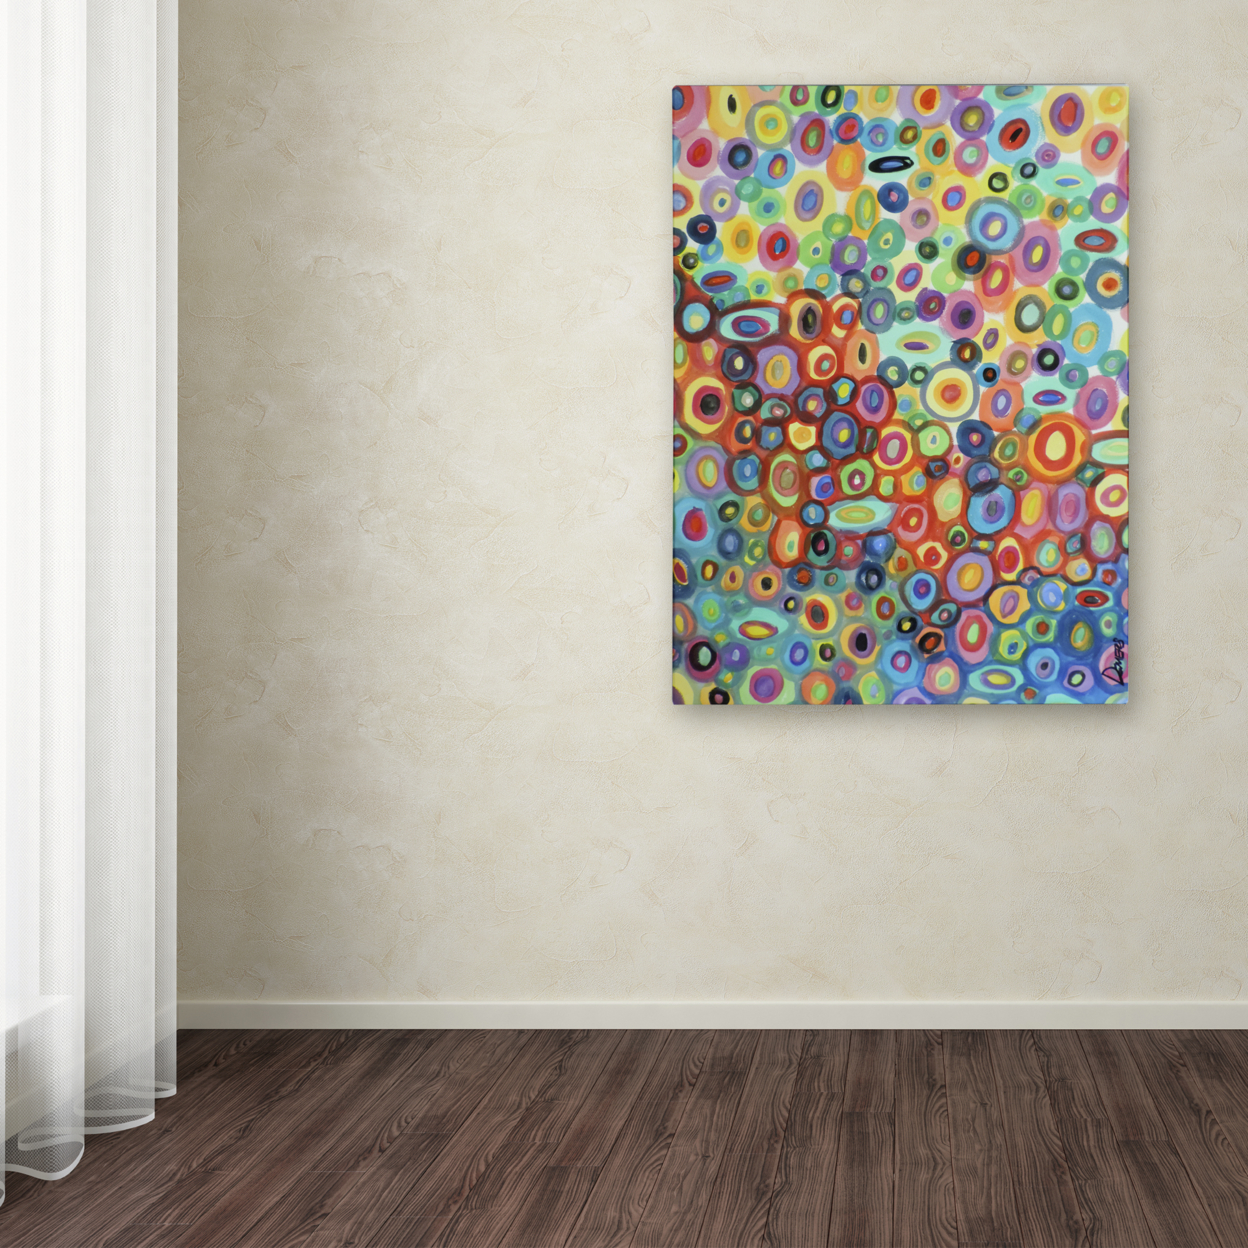 Sylvie Demers 'First Love' Canvas Wall Art 35 X 47 Inches